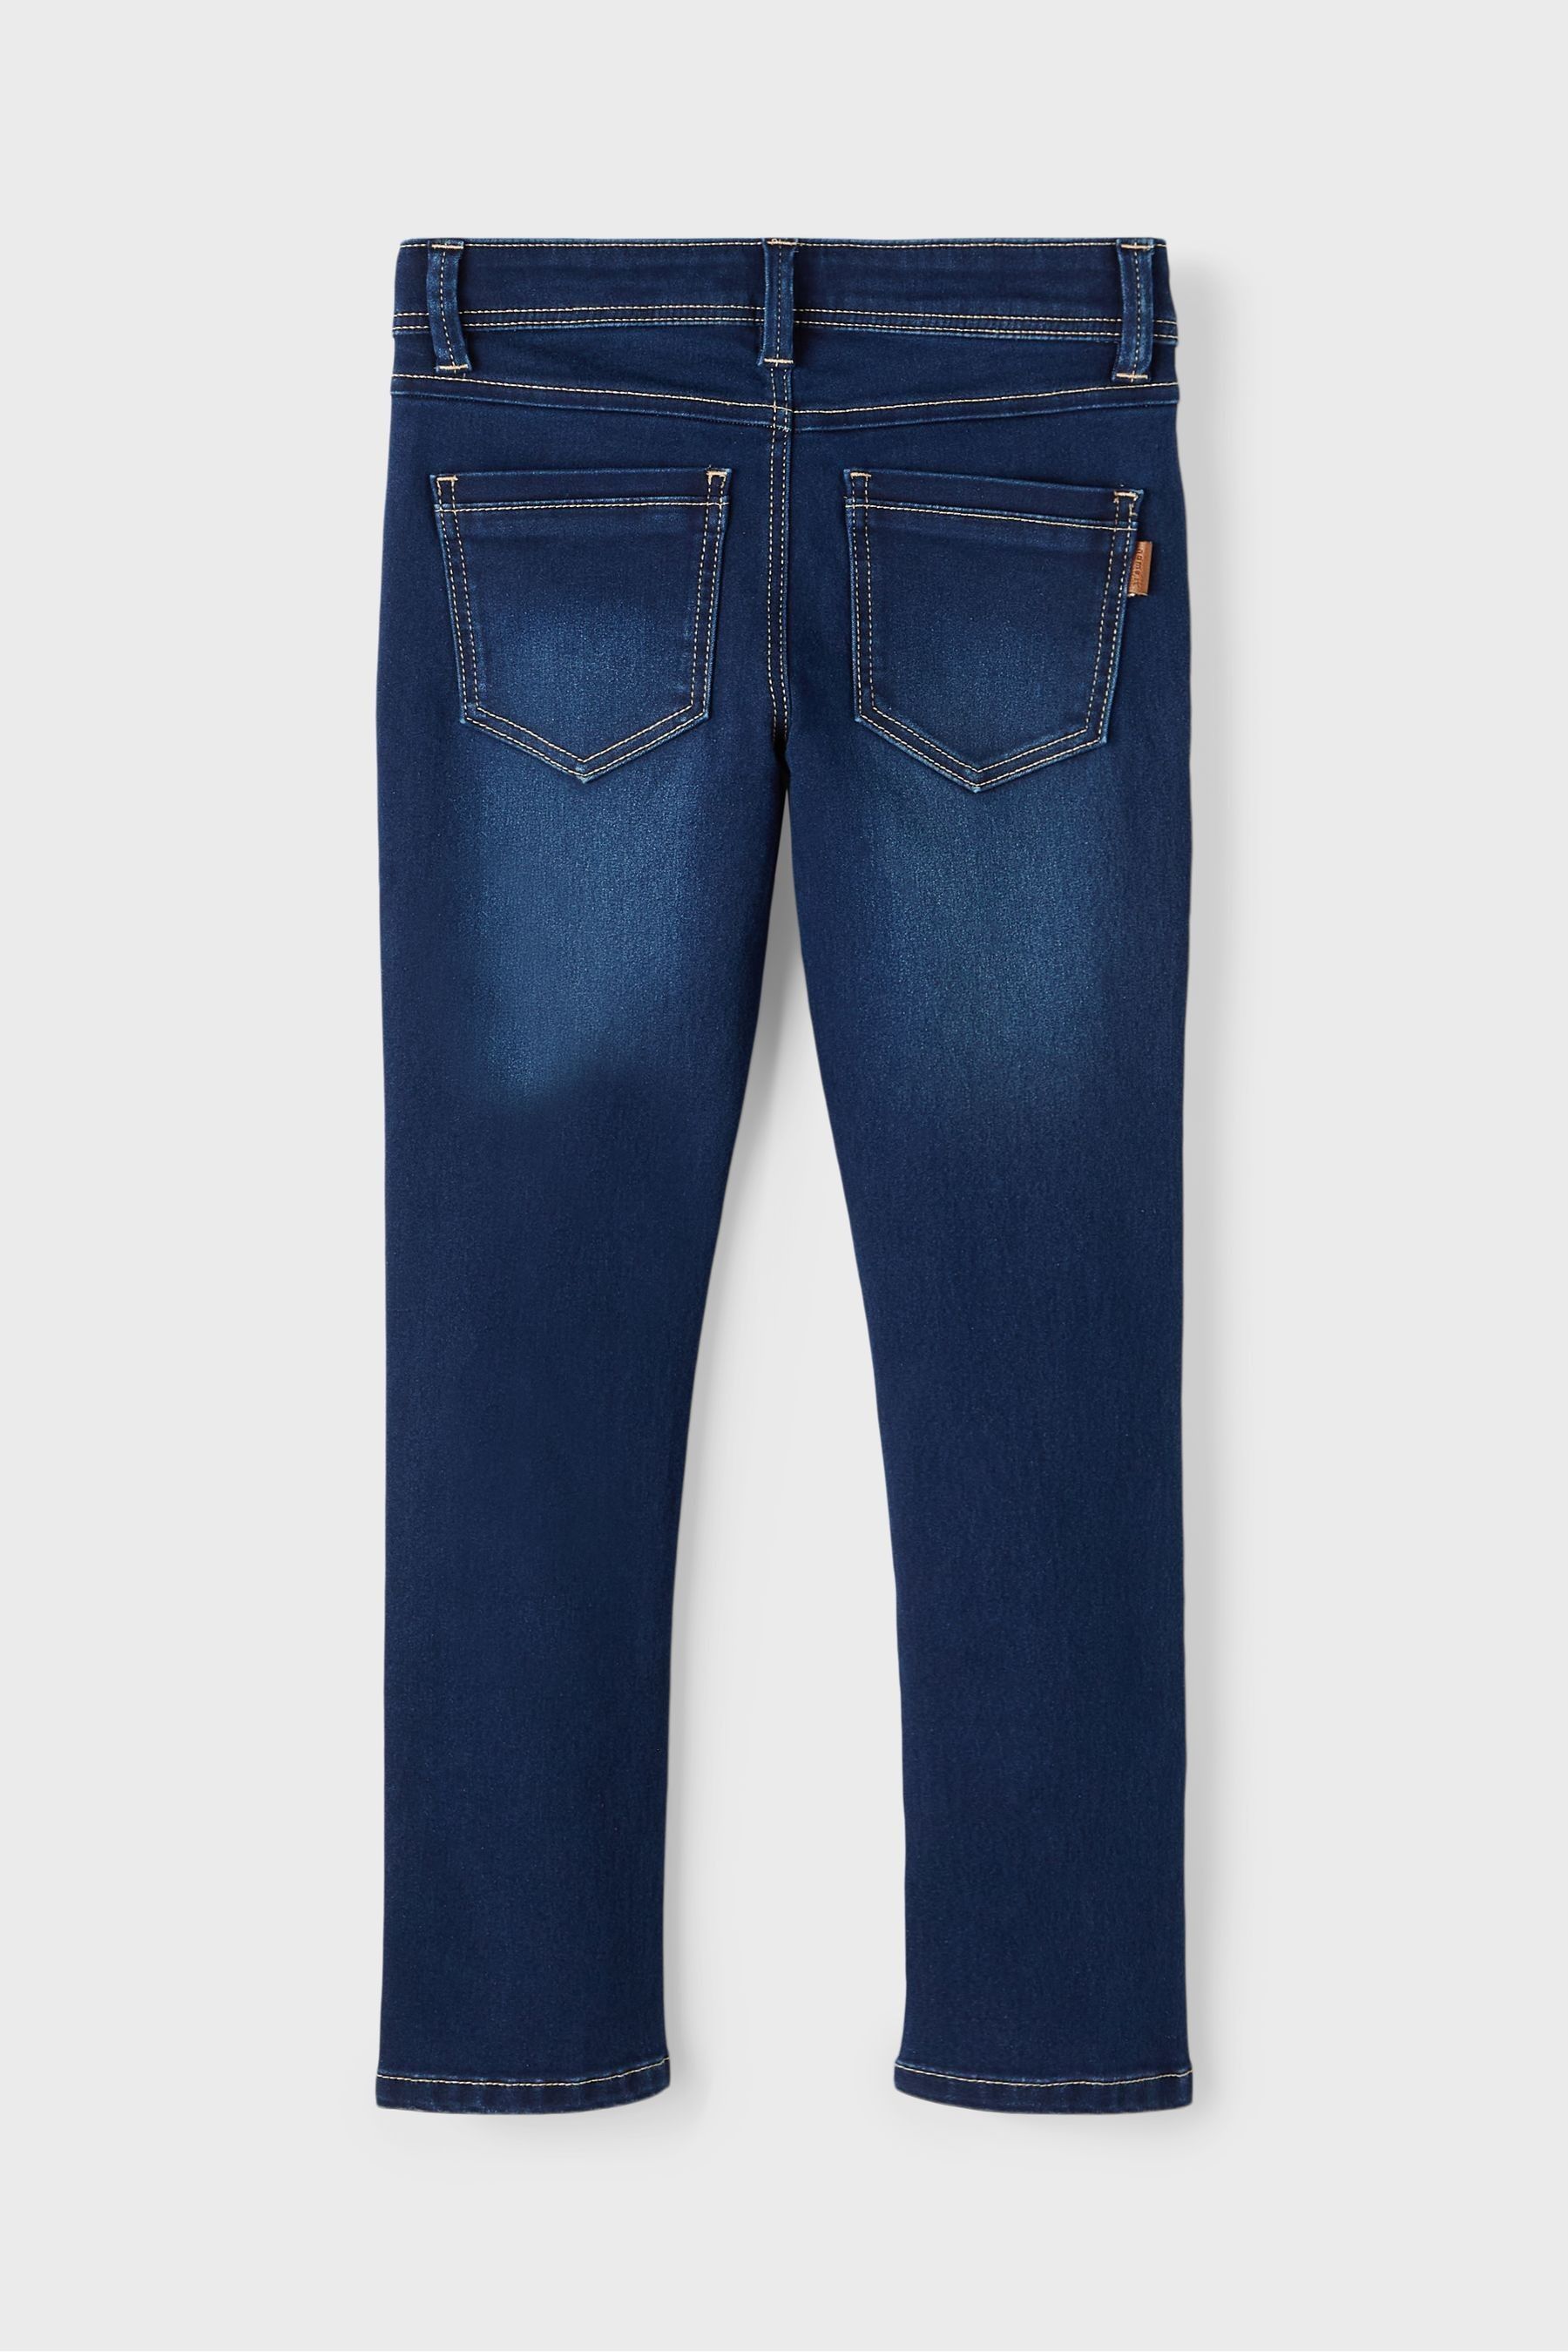 Name It Blue Skinny Jeans - Image 3 of 5